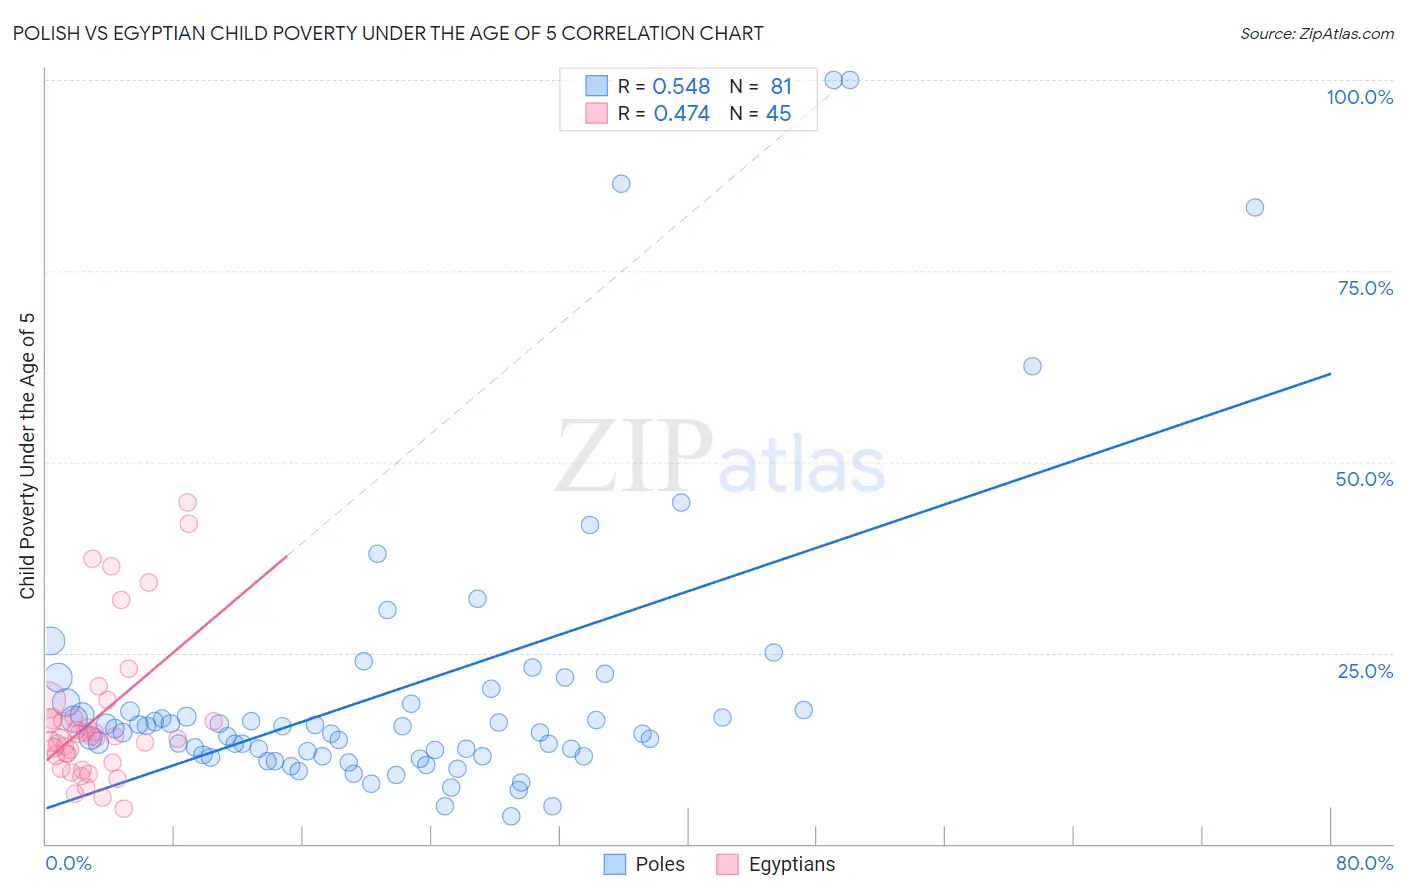 Polish vs Egyptian Child Poverty Under the Age of 5